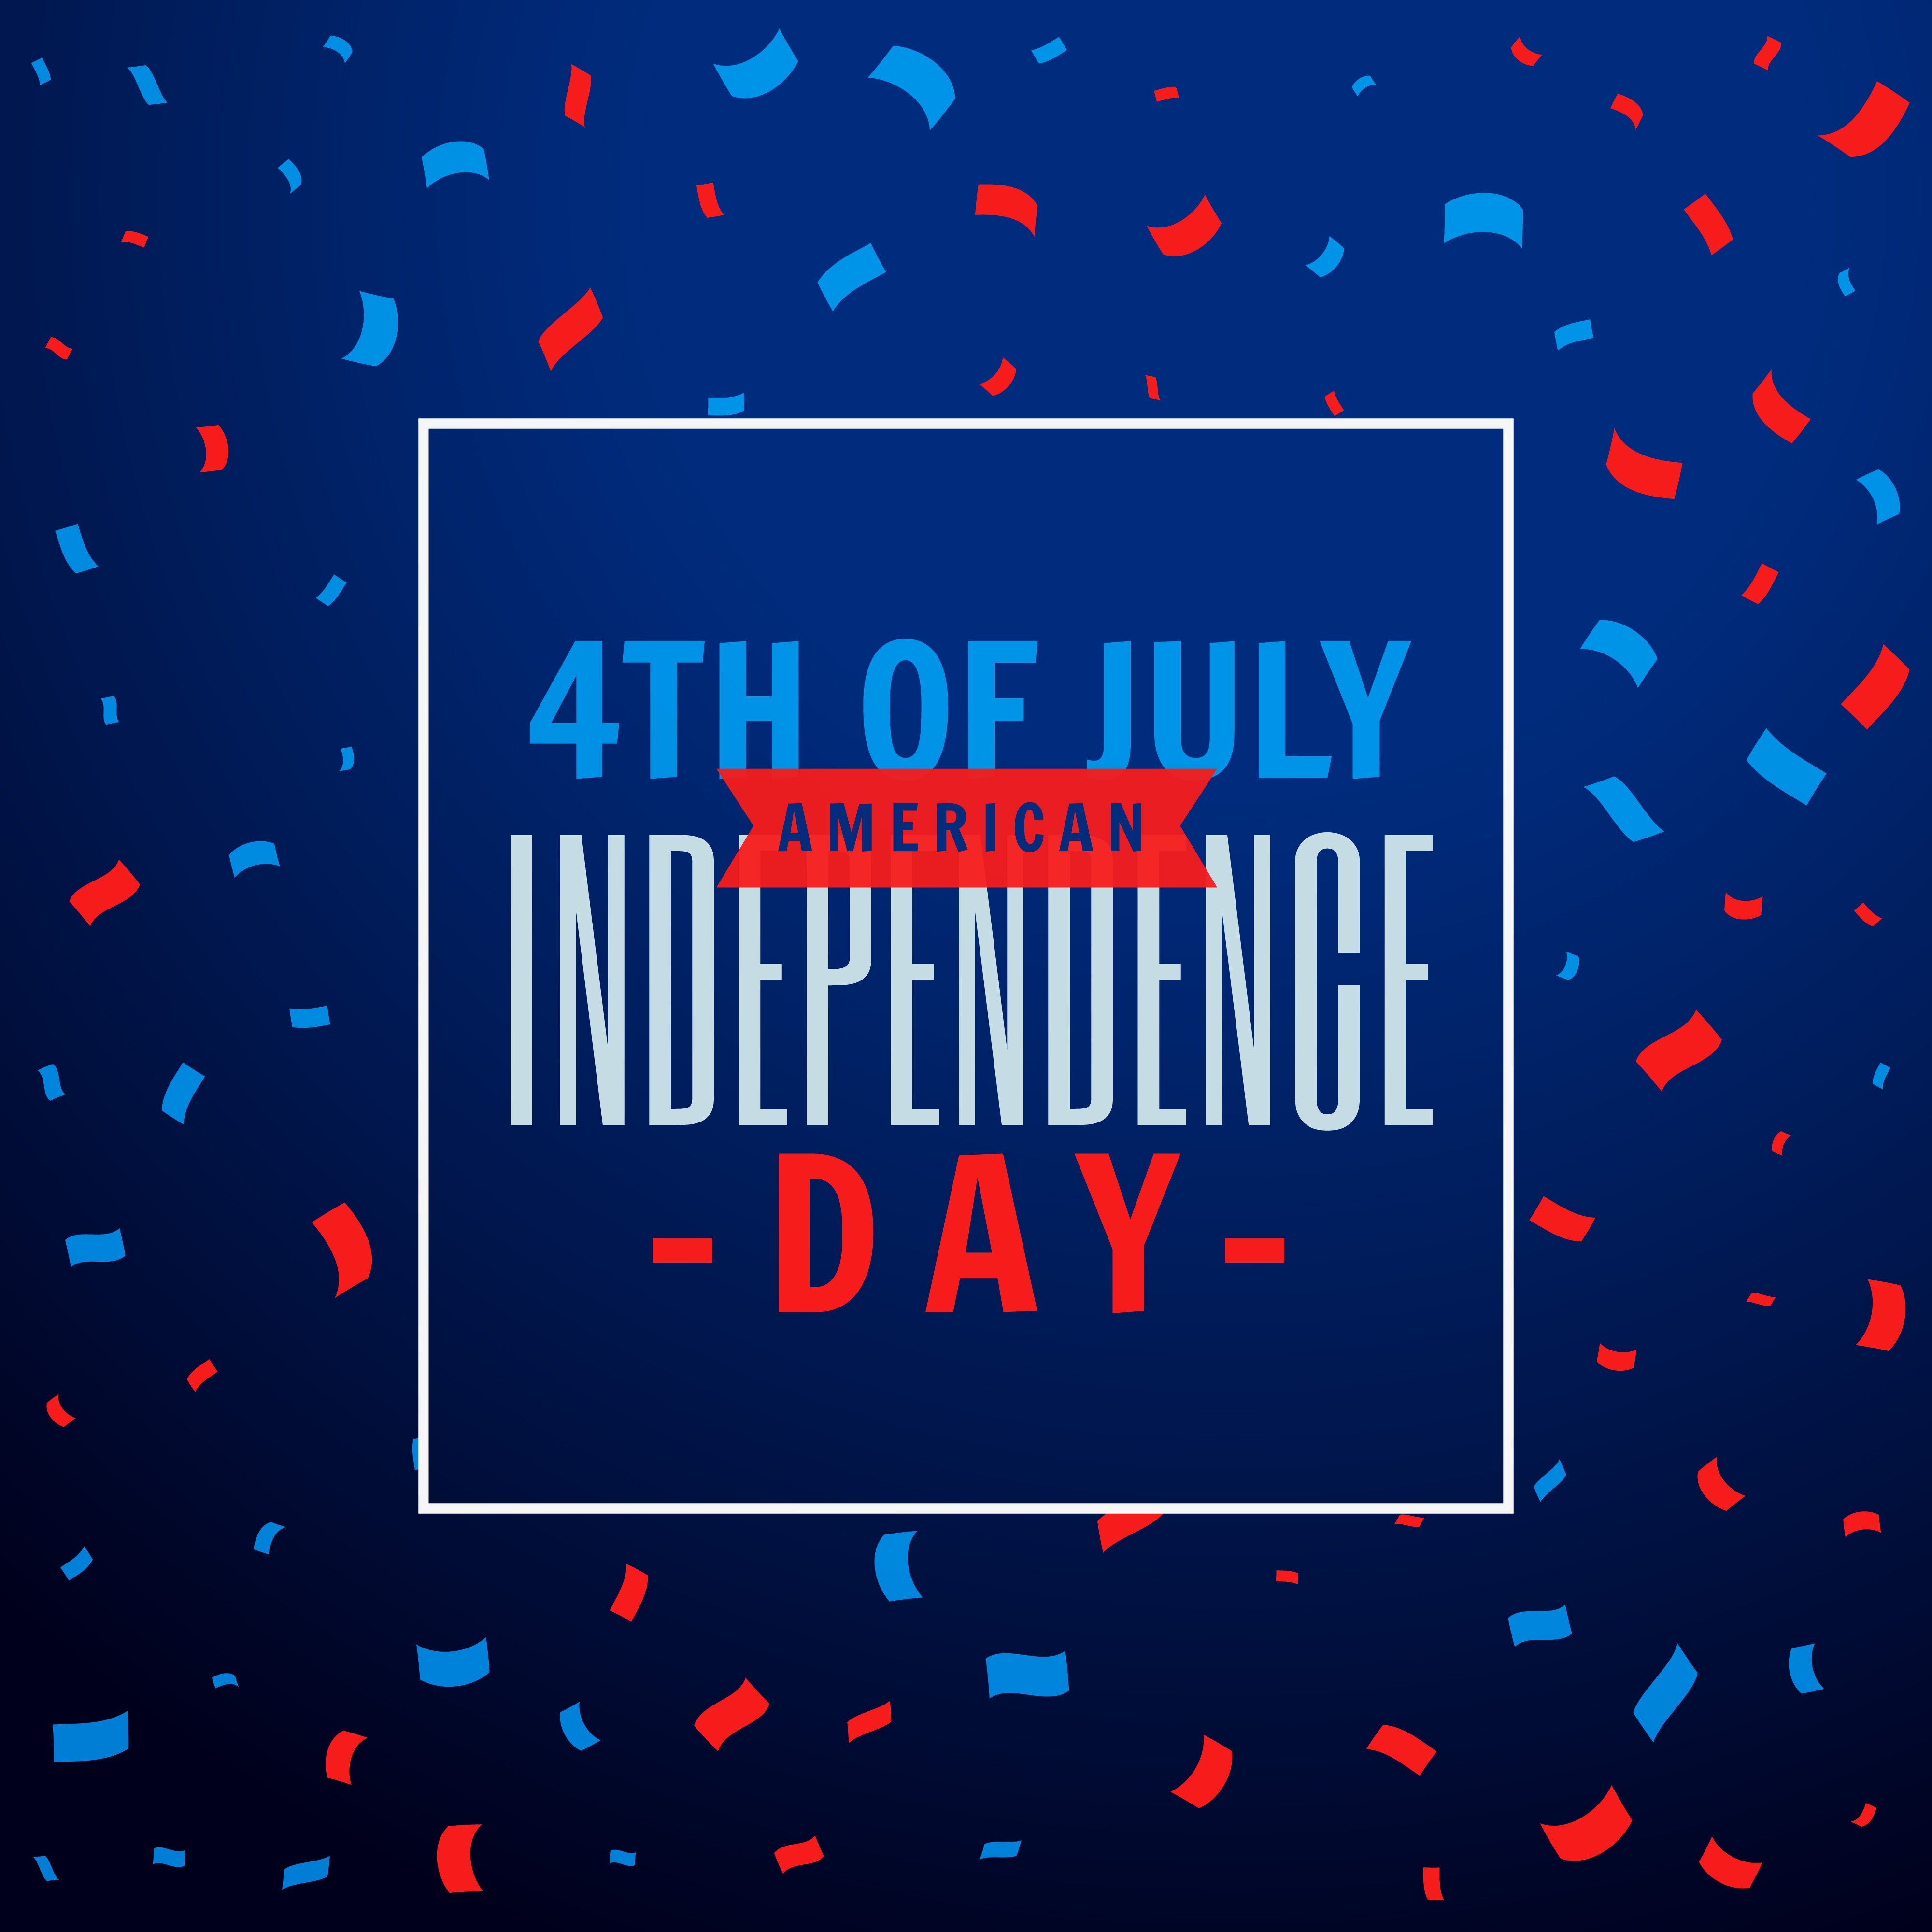 A blue graphic that reads, "4th of July, American Independence Day" with streamers in the background